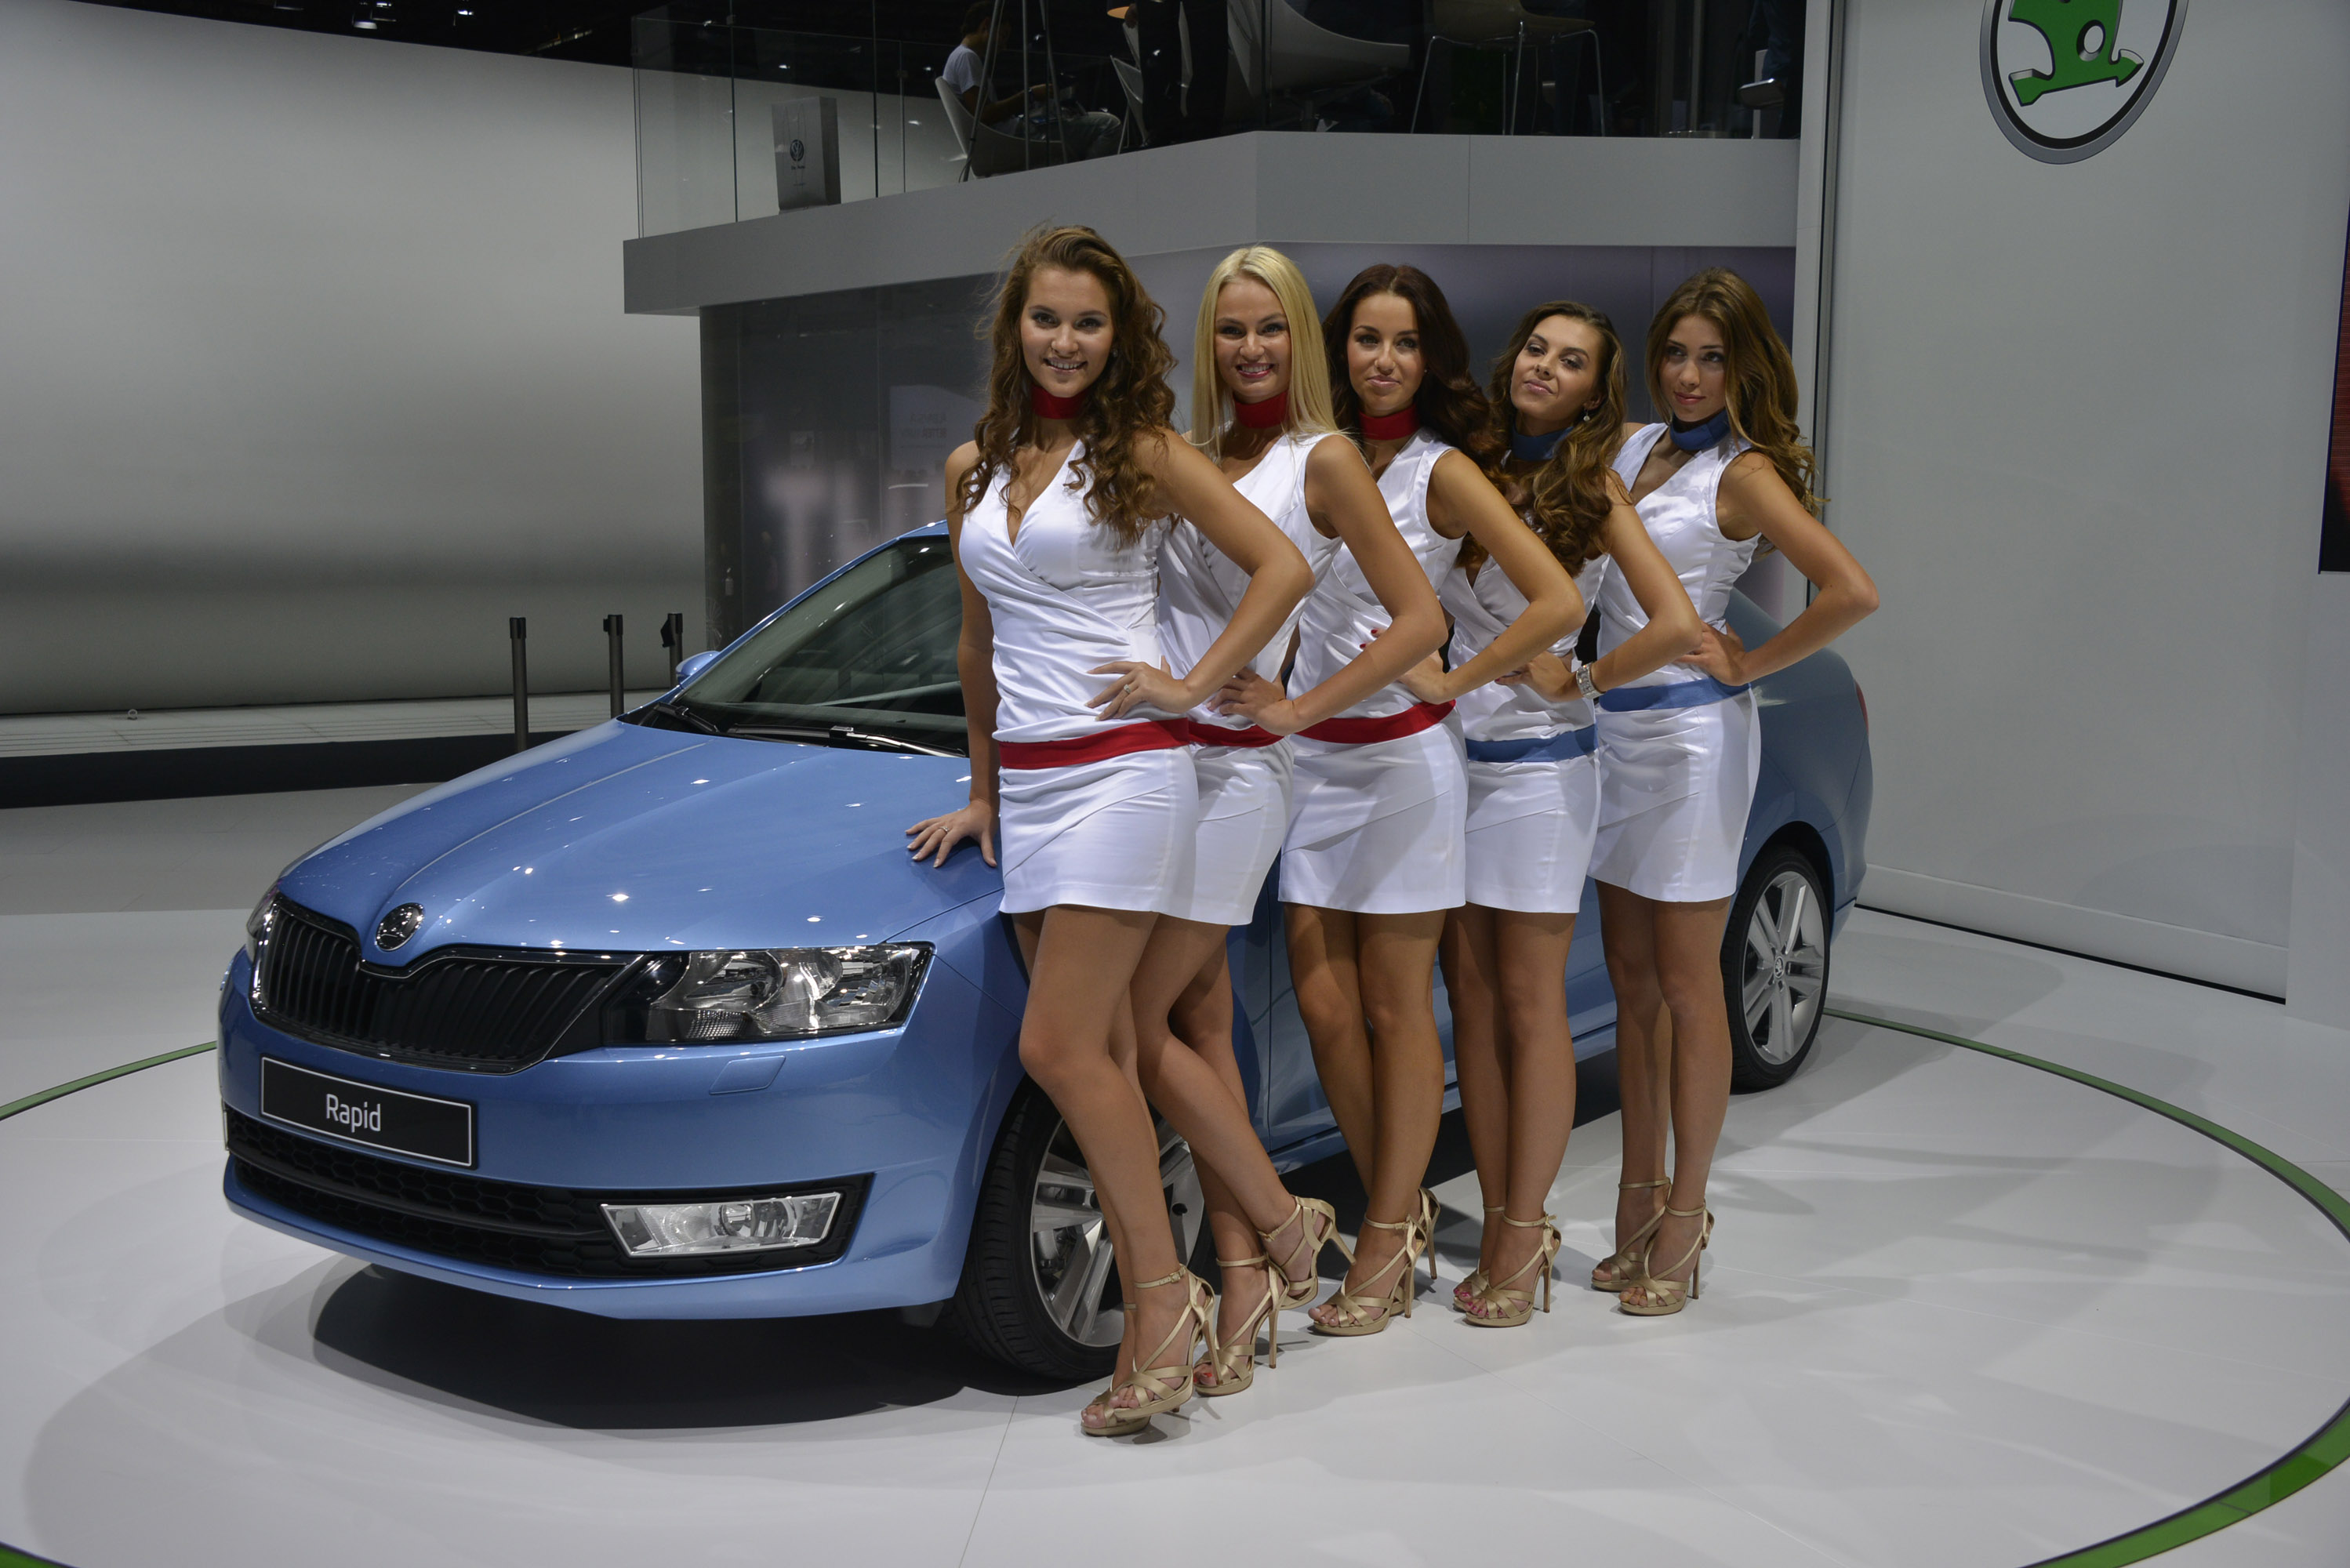 Paris Motor Show Girls (2012) - 39 Free high resolution pictures of this mo...